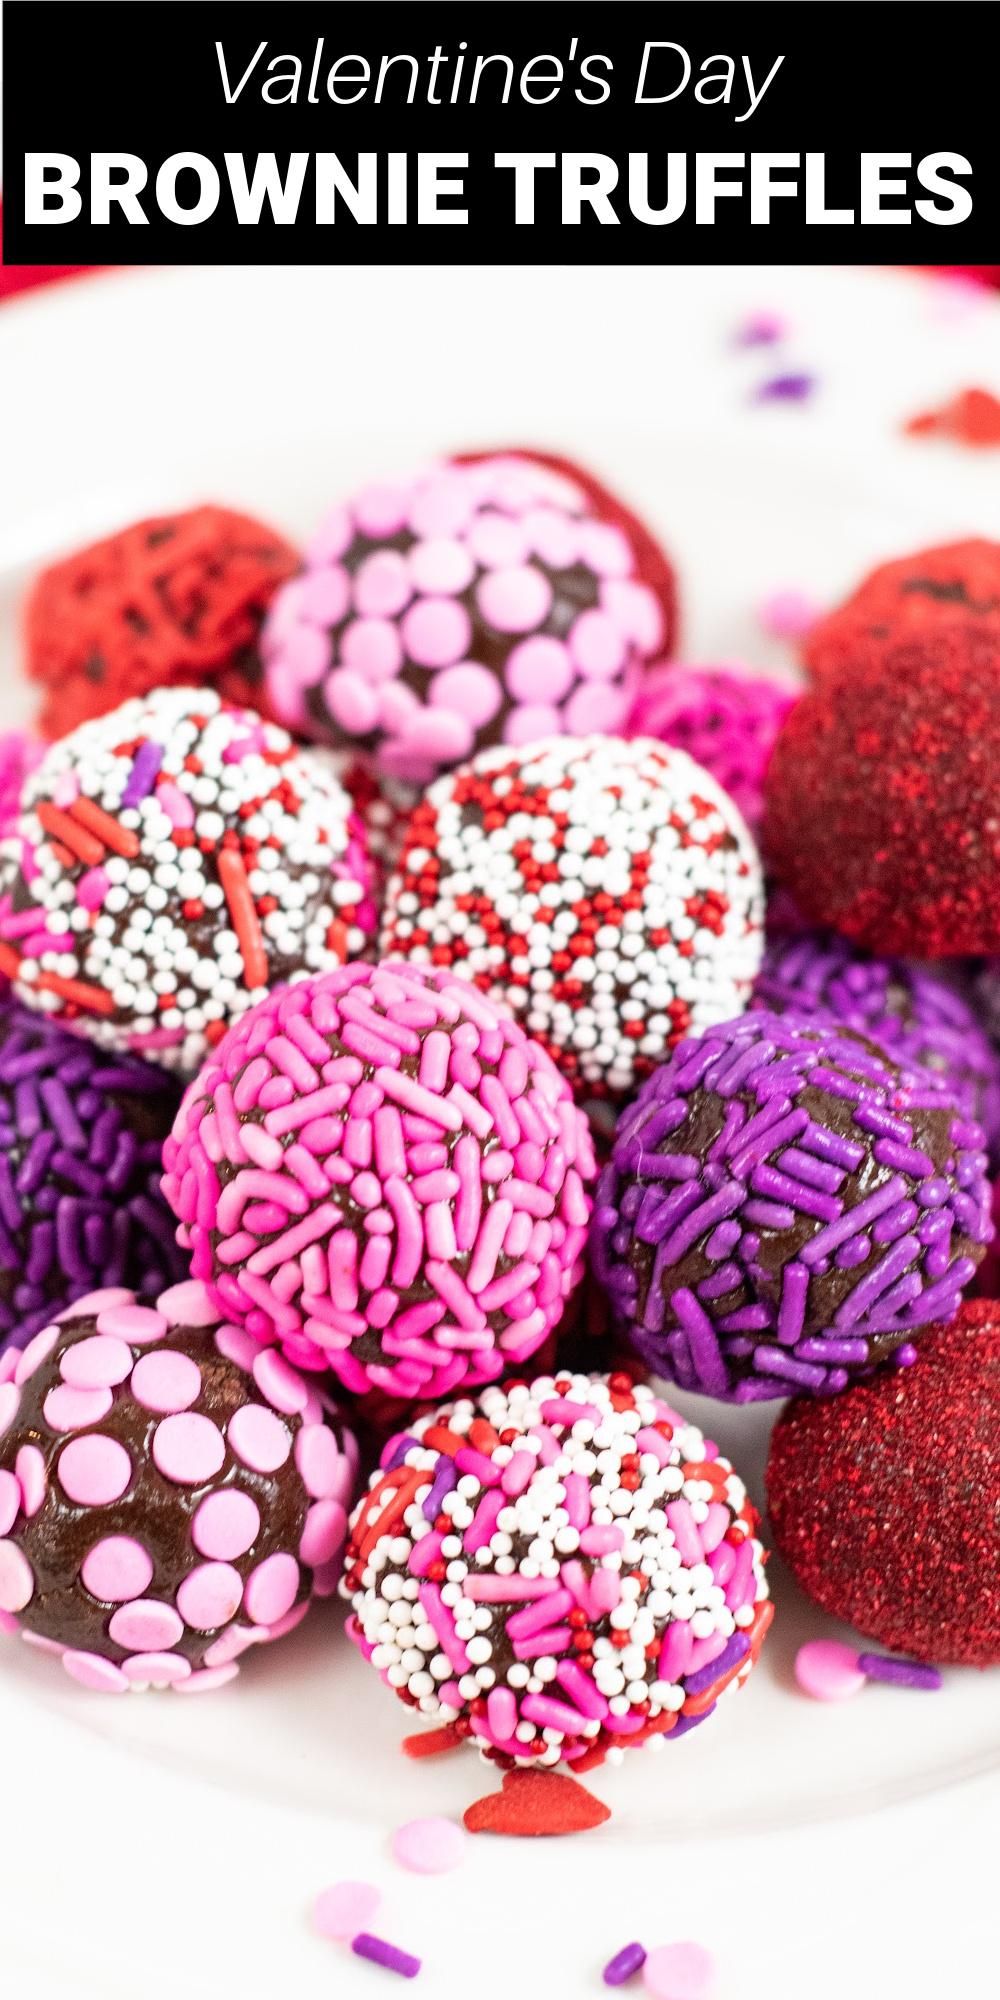 Make these decadent chocolate Valentine's Brownie Truffles with just a few simple ingredients. Start with a box brownie mix making a rich chocolate center and rolling the truffles in colorful Valentine sprinkles. This is a sweet treat for a loved one or friend. 